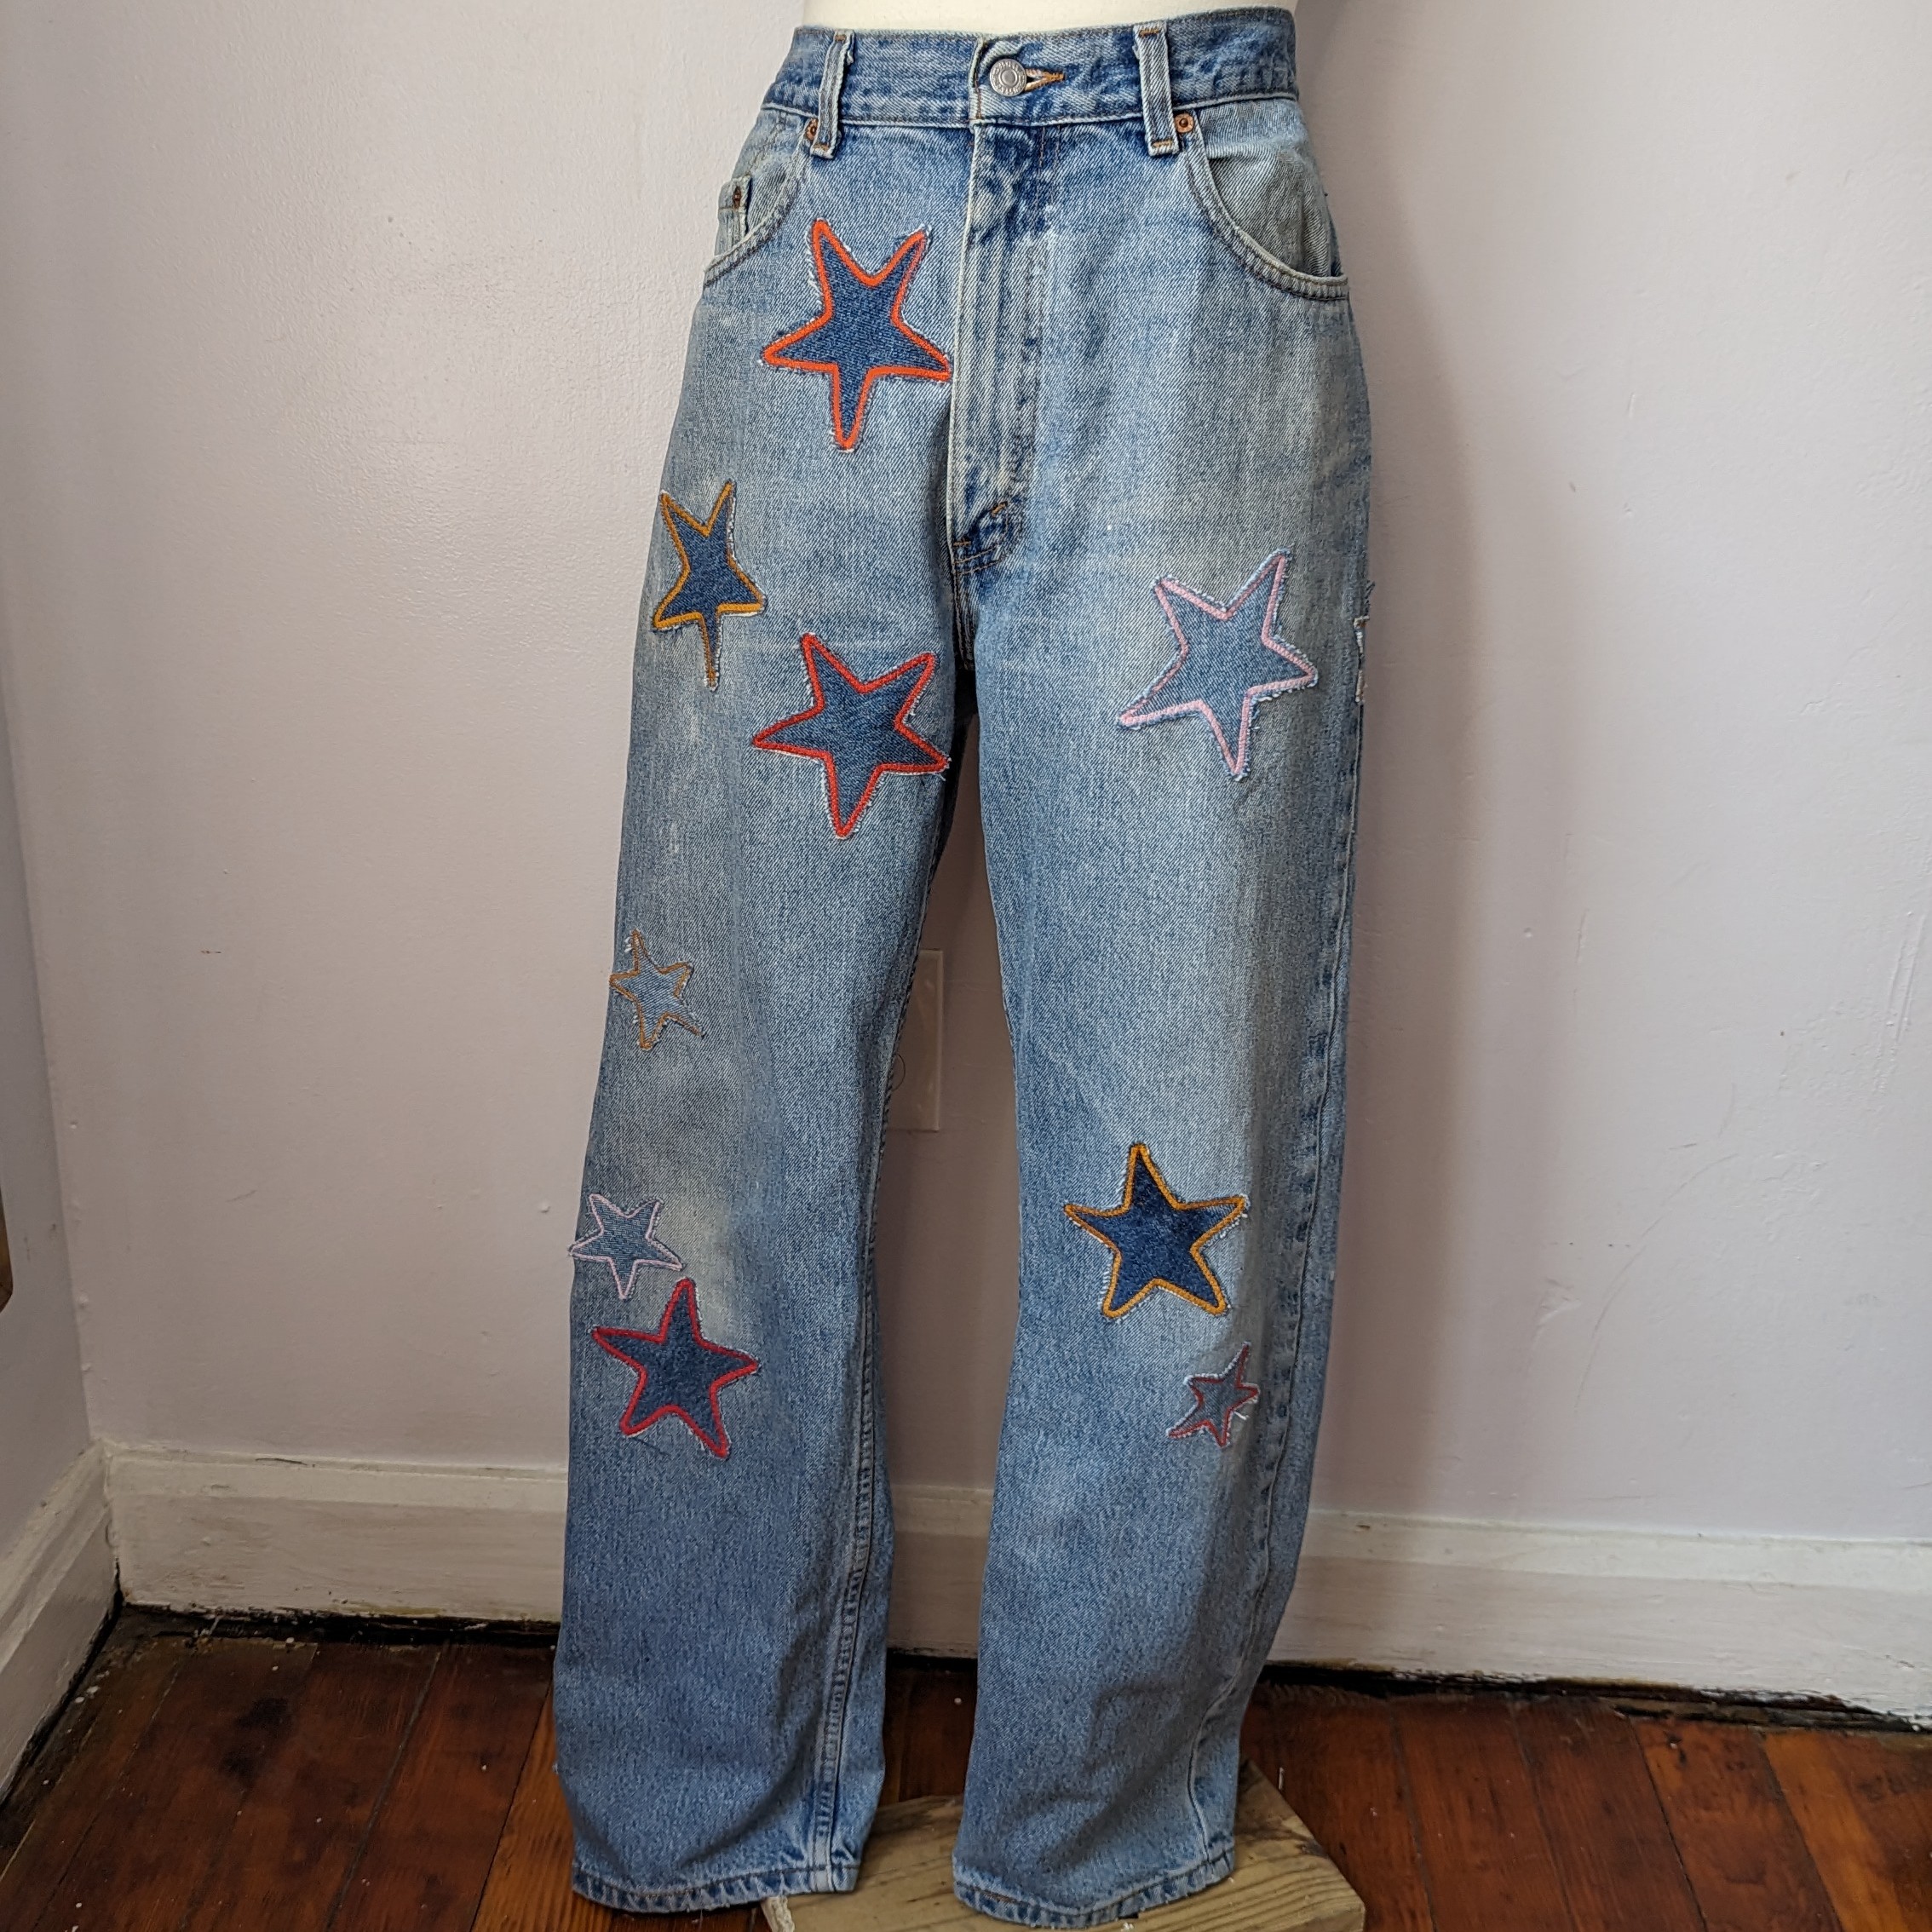 A mannequin wearing a pair of jeans with stars on them.